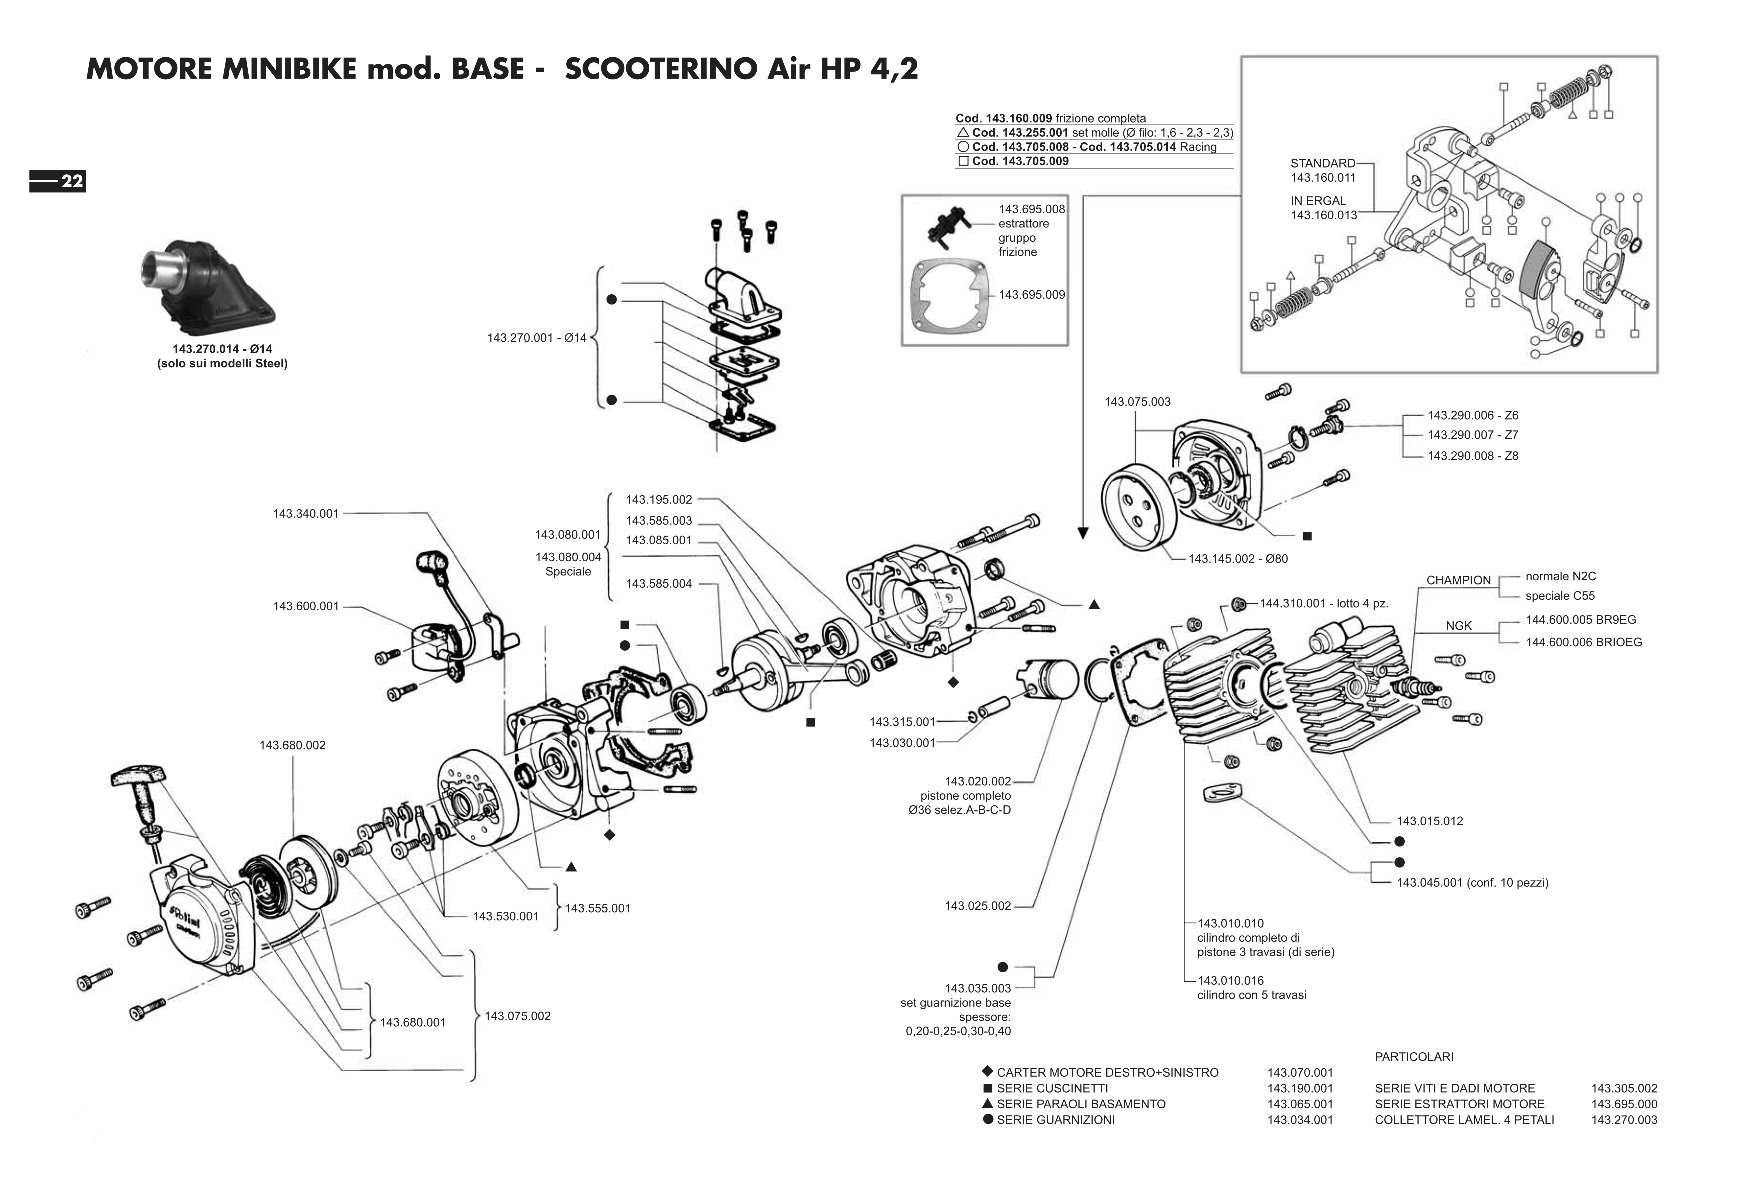 Exploded view Motore (HP 4,2)